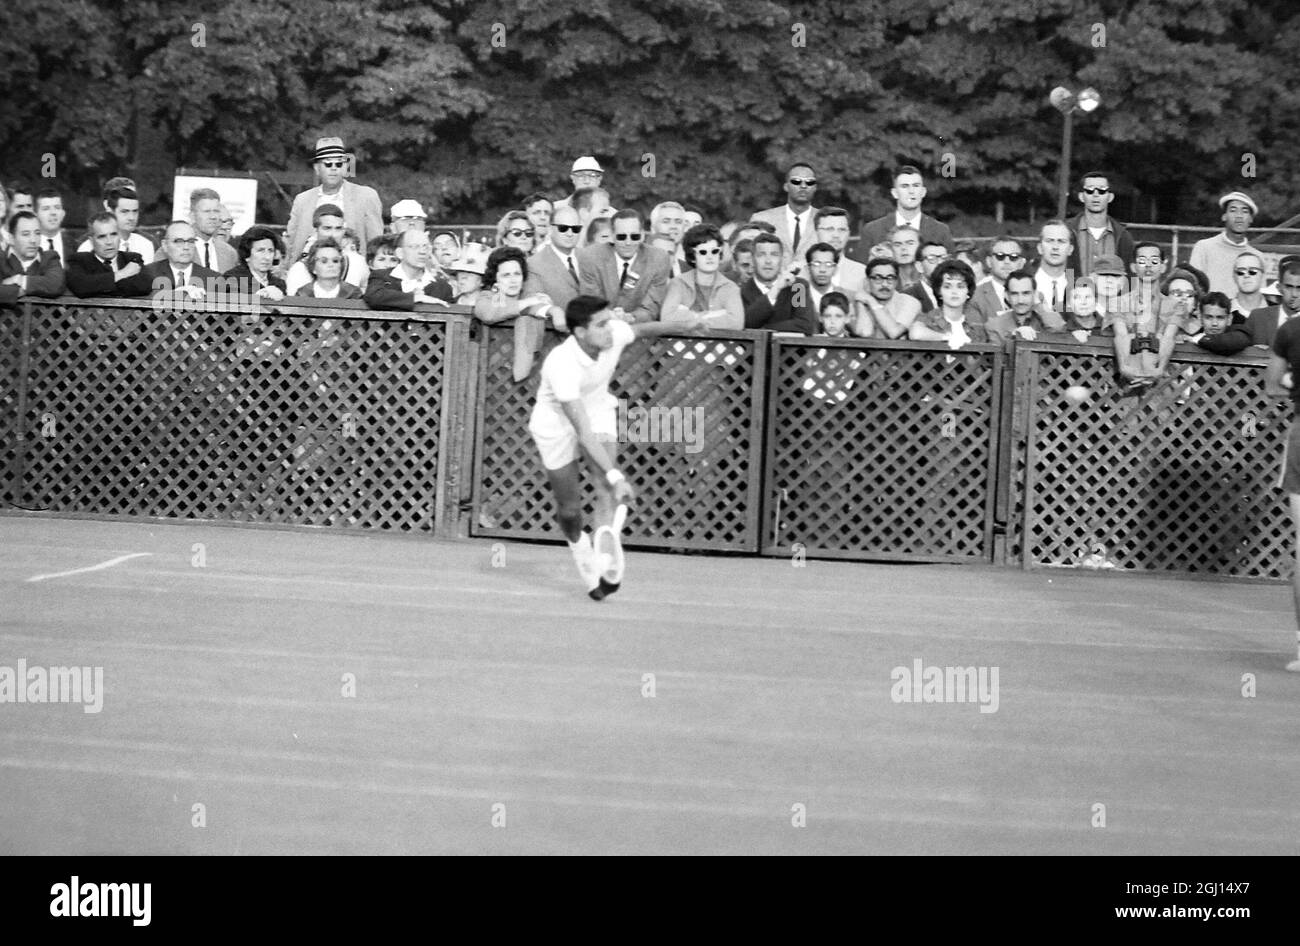 JAIOP MUJERJEA - TENNIS PLAYER IN ACTION AT US LAWN TENNIS CHAMPIONSHIPS IN FOREST HILL - ; 9 SEPTEMBER 1962 Stock Photo